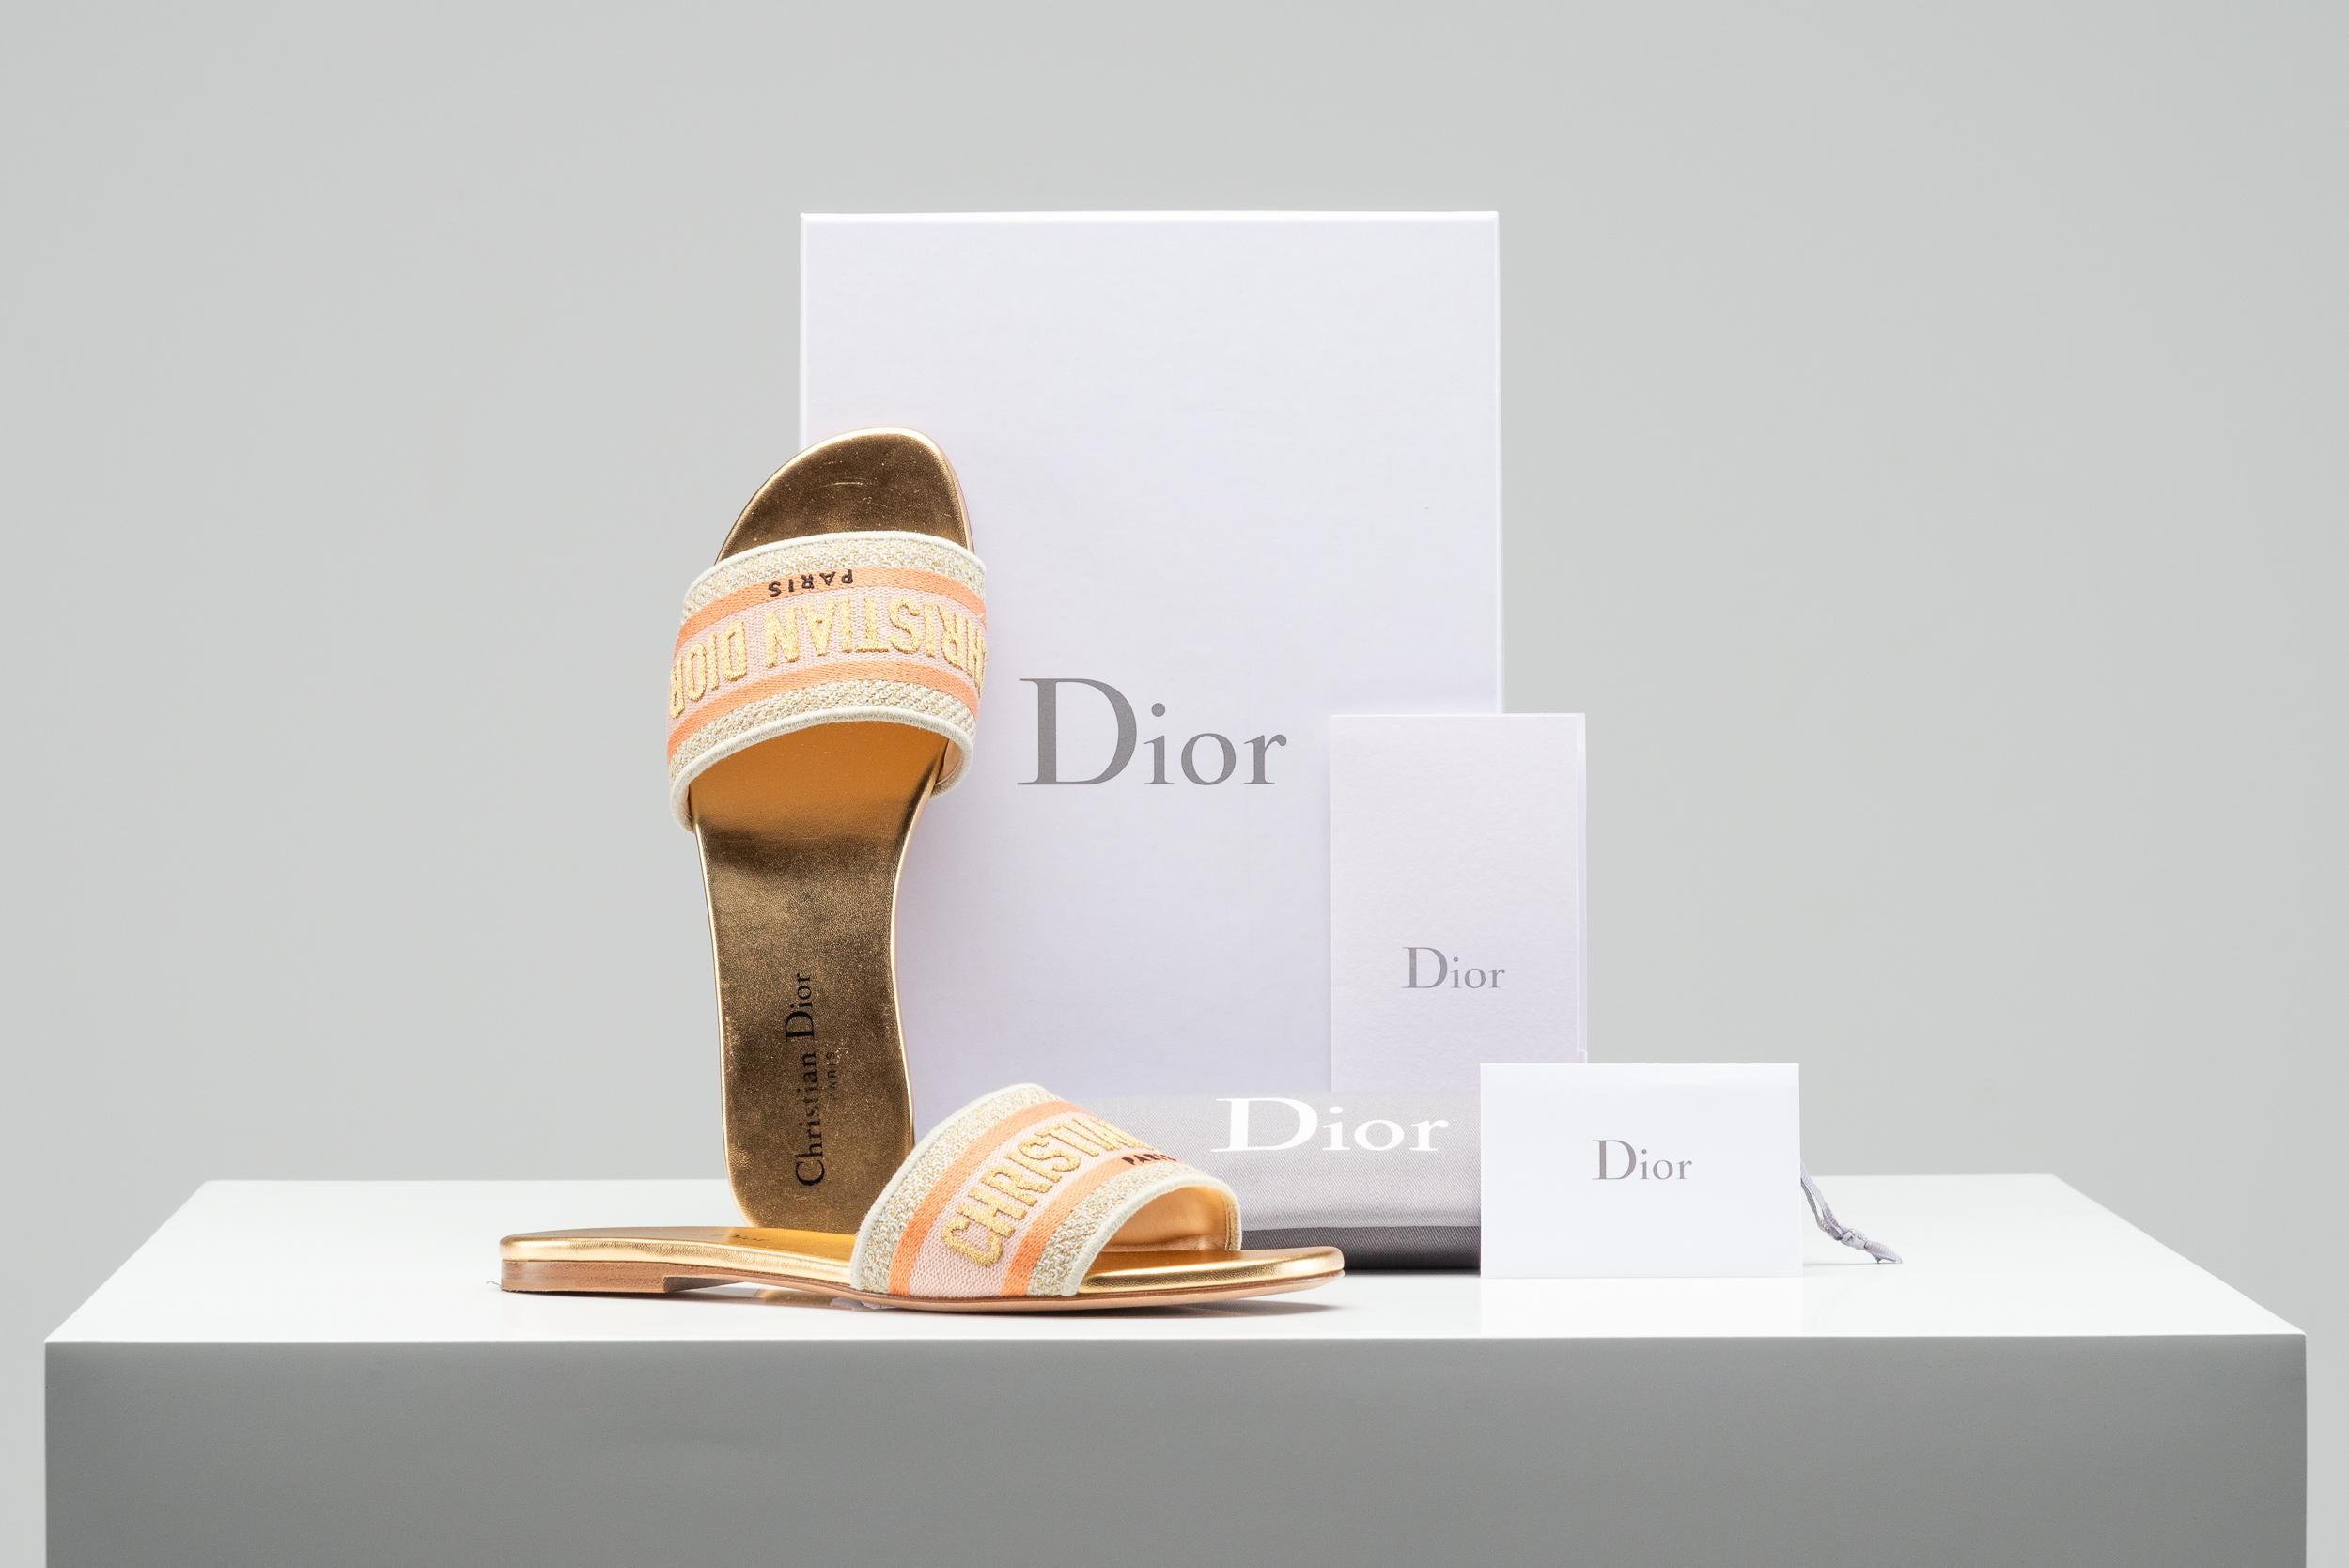 From the collection of SAVINETI we offer these pair of Dior Dway Sandals:
- Brand: Dior
- Model: Dway Slides Sandals
- Size: 37 1/2
- Materials: Matte leather insole, Rubber sole with engraved star, Christian Dior's lucky symbol
- Condition: Very